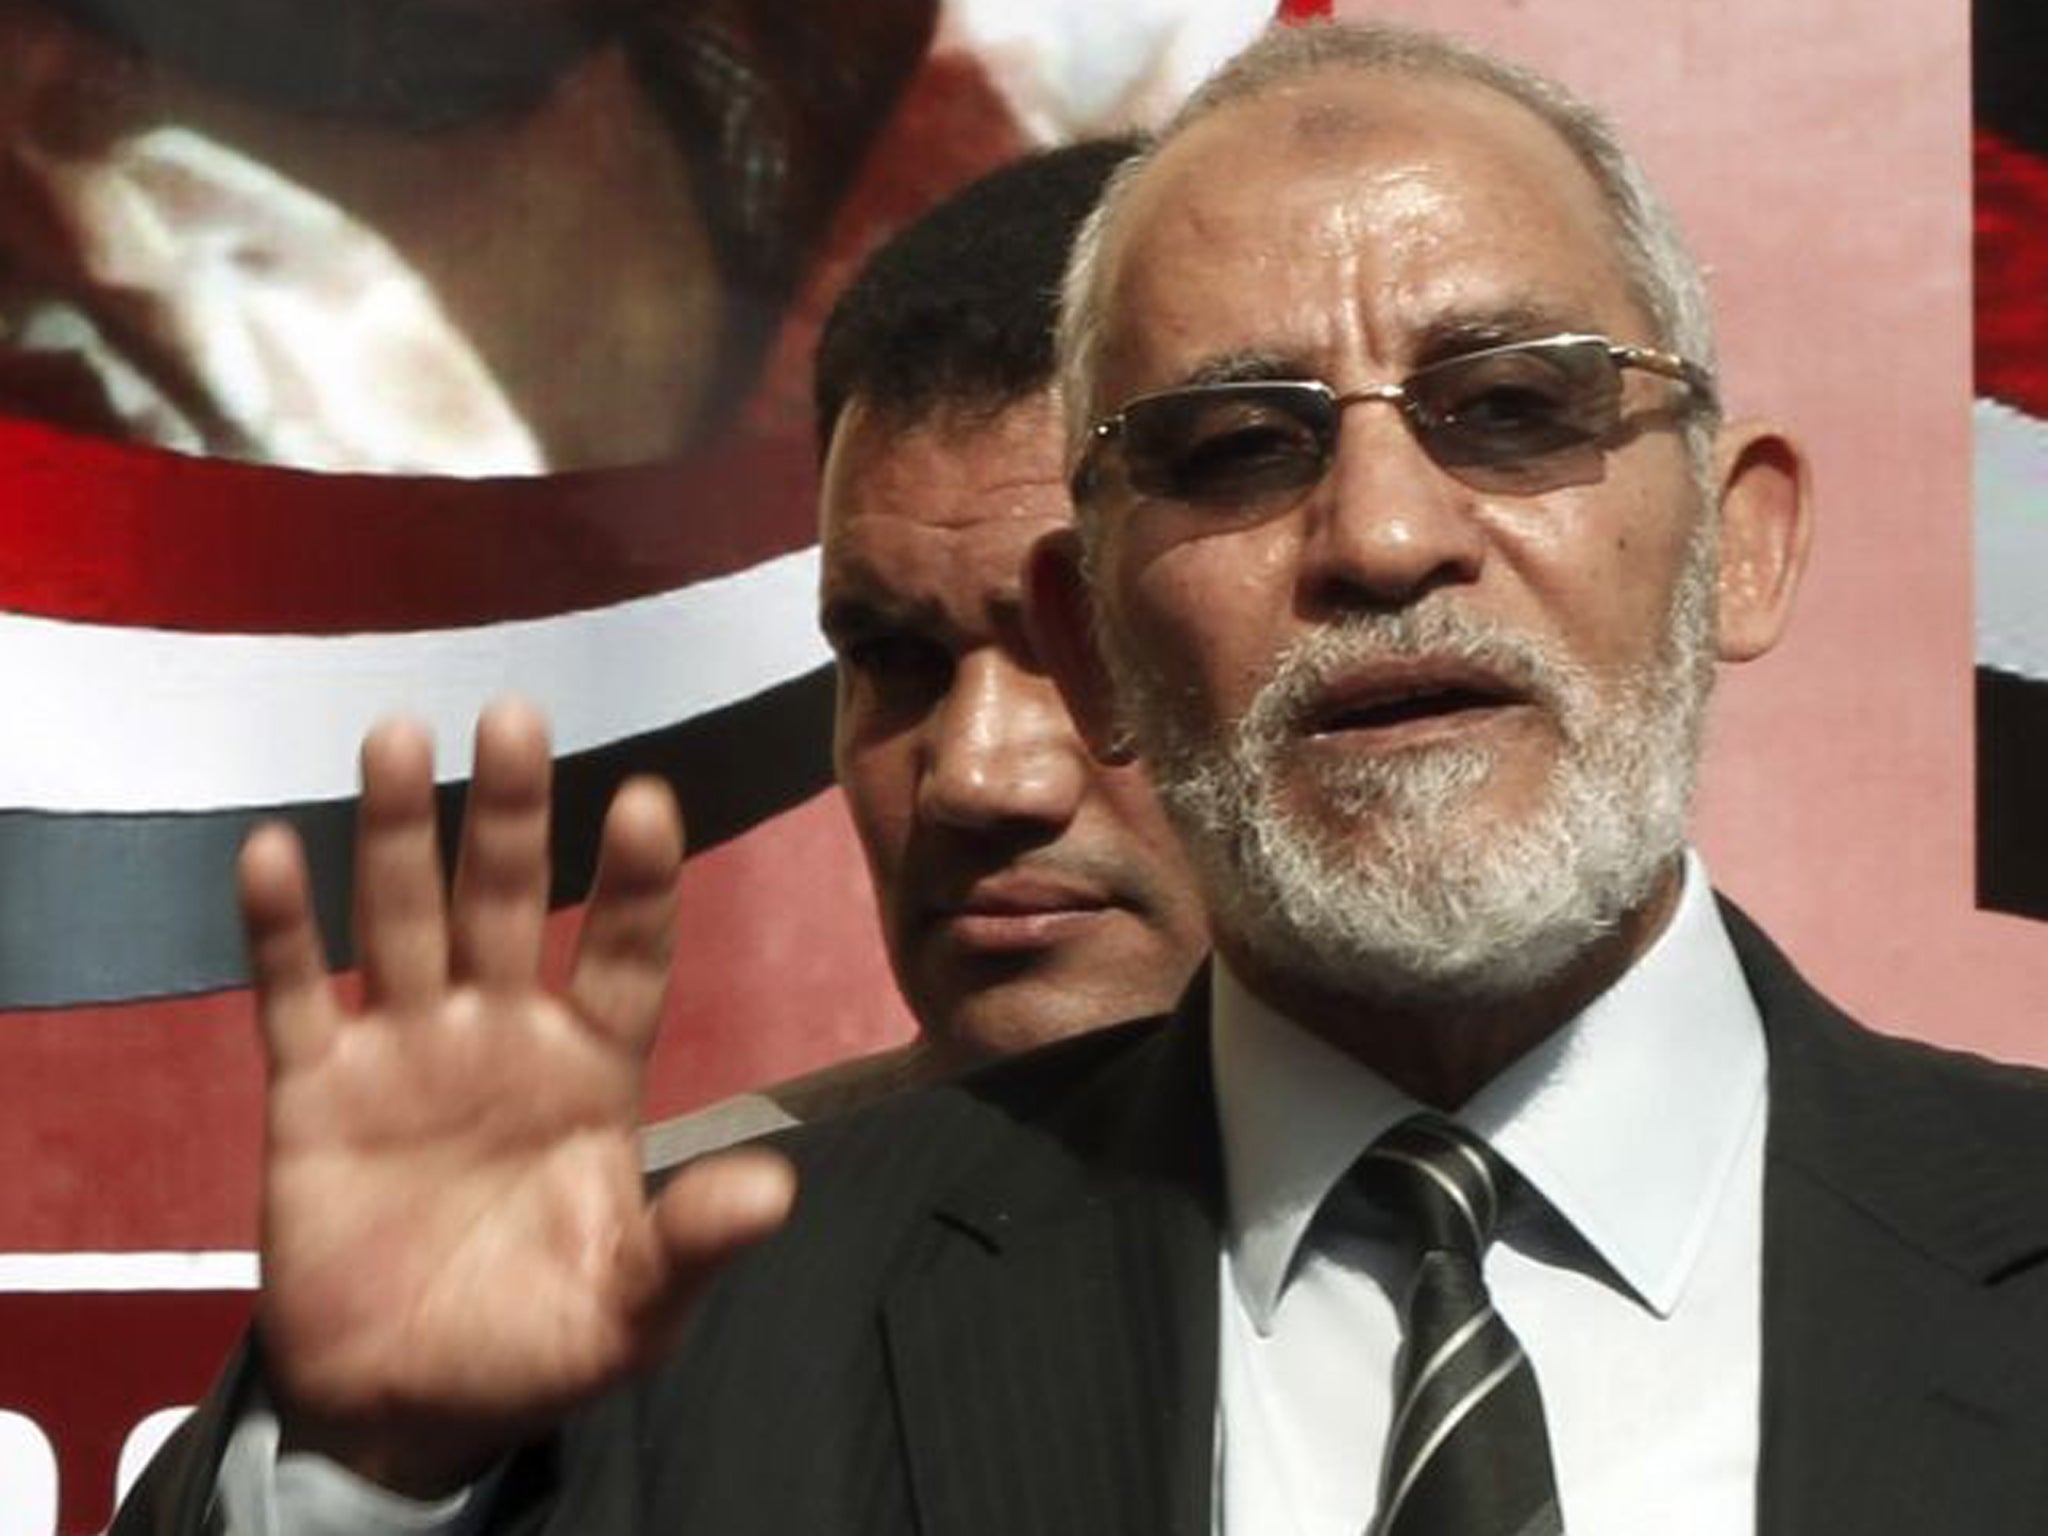 Mohamed Badie reportedly suffered a heart attack